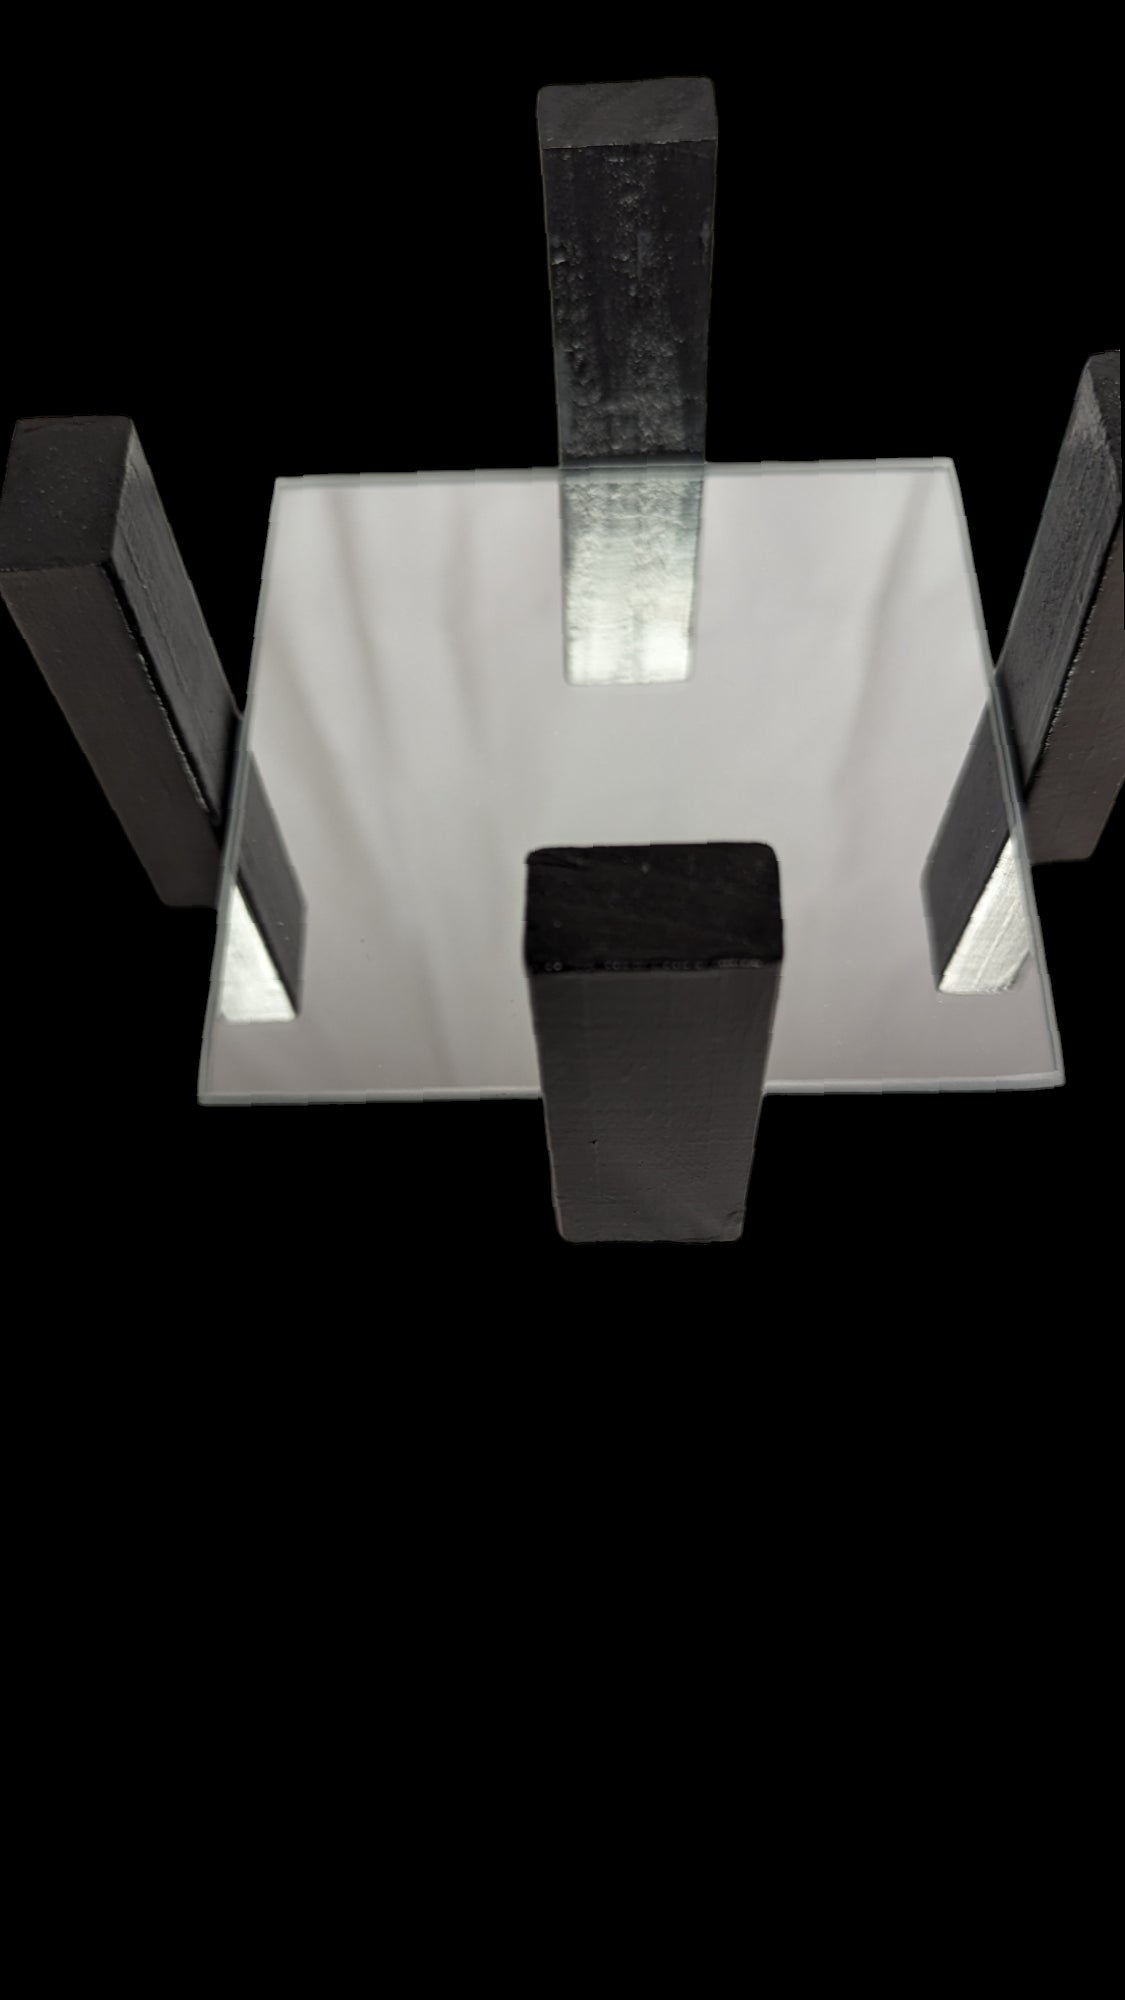 Square mirror and holder